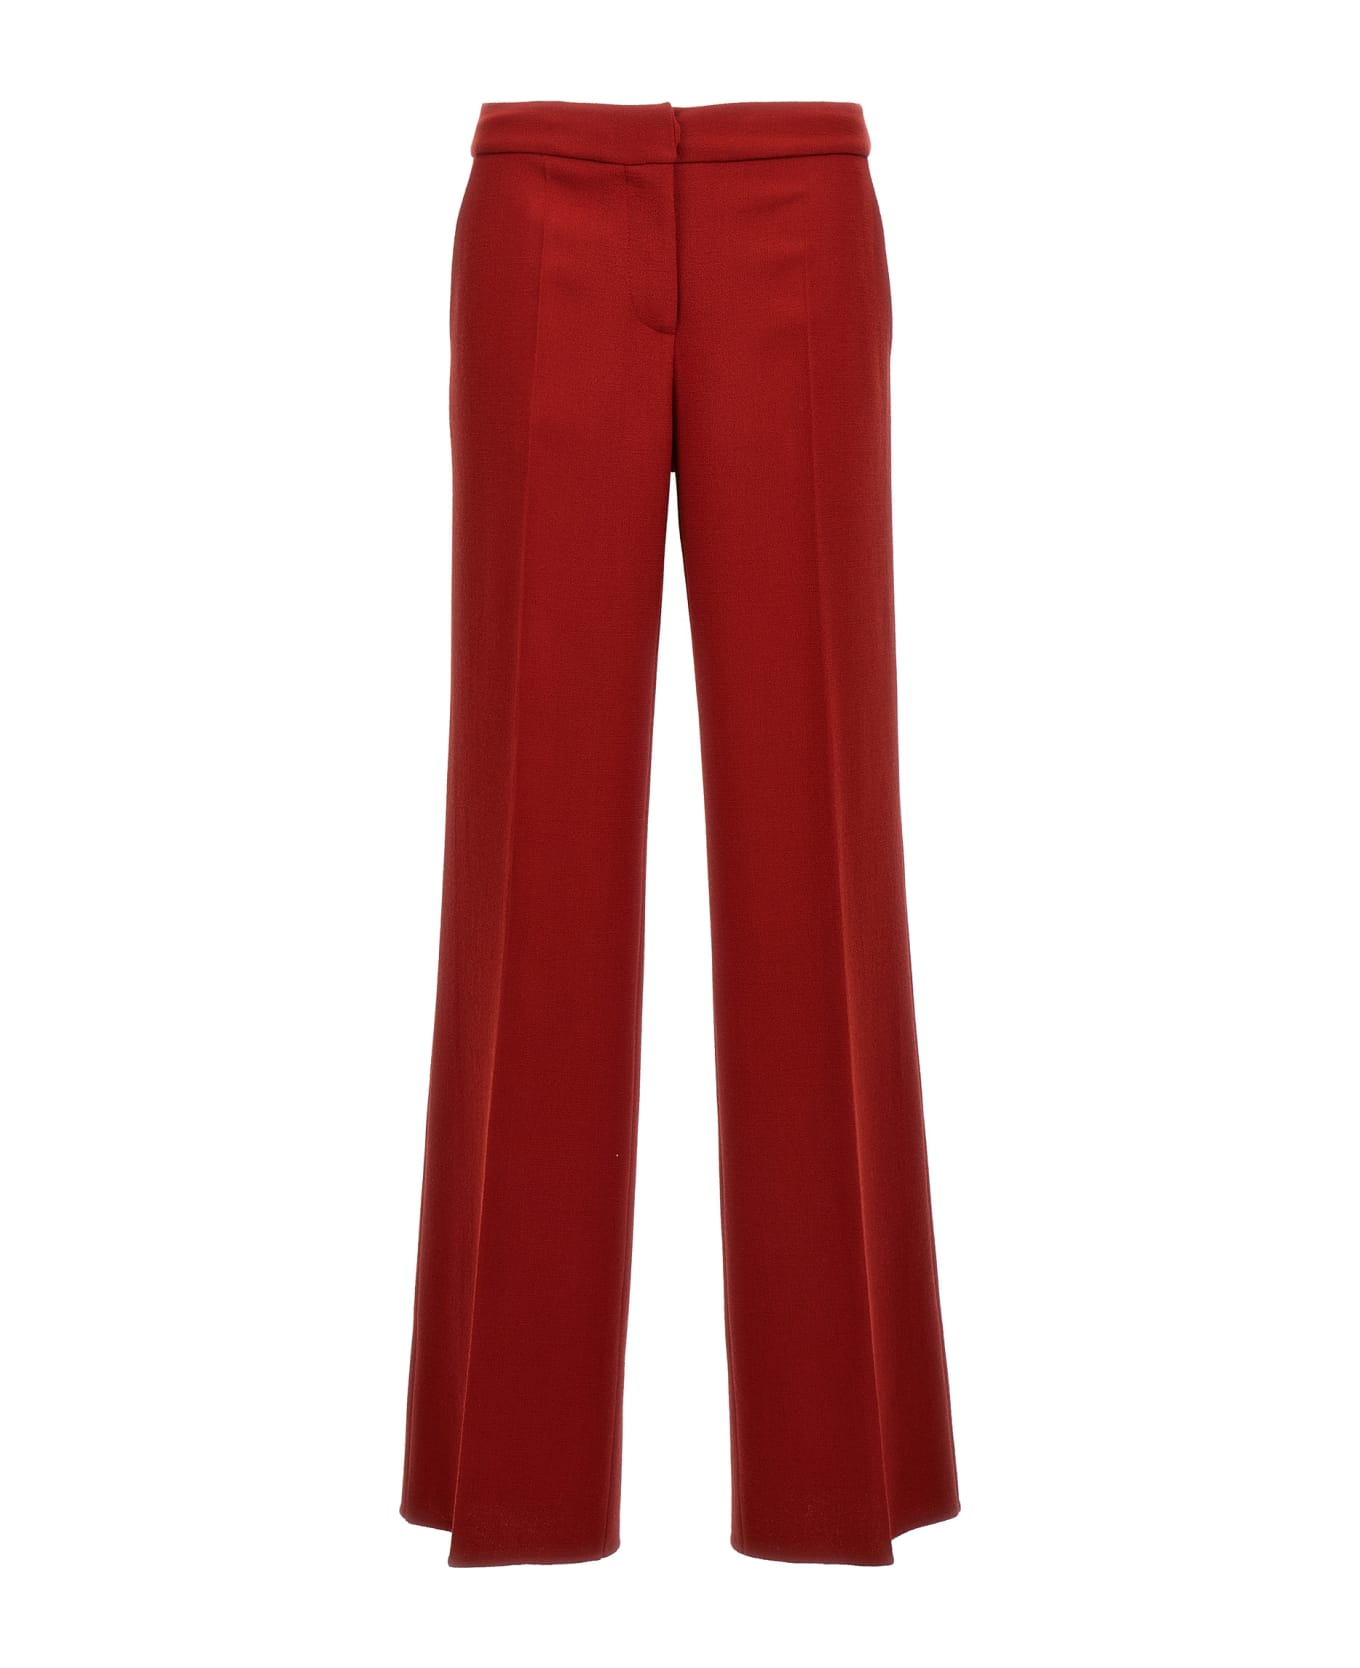 Gianluca Capannolo 'valerie' Pants - Red ボトムス